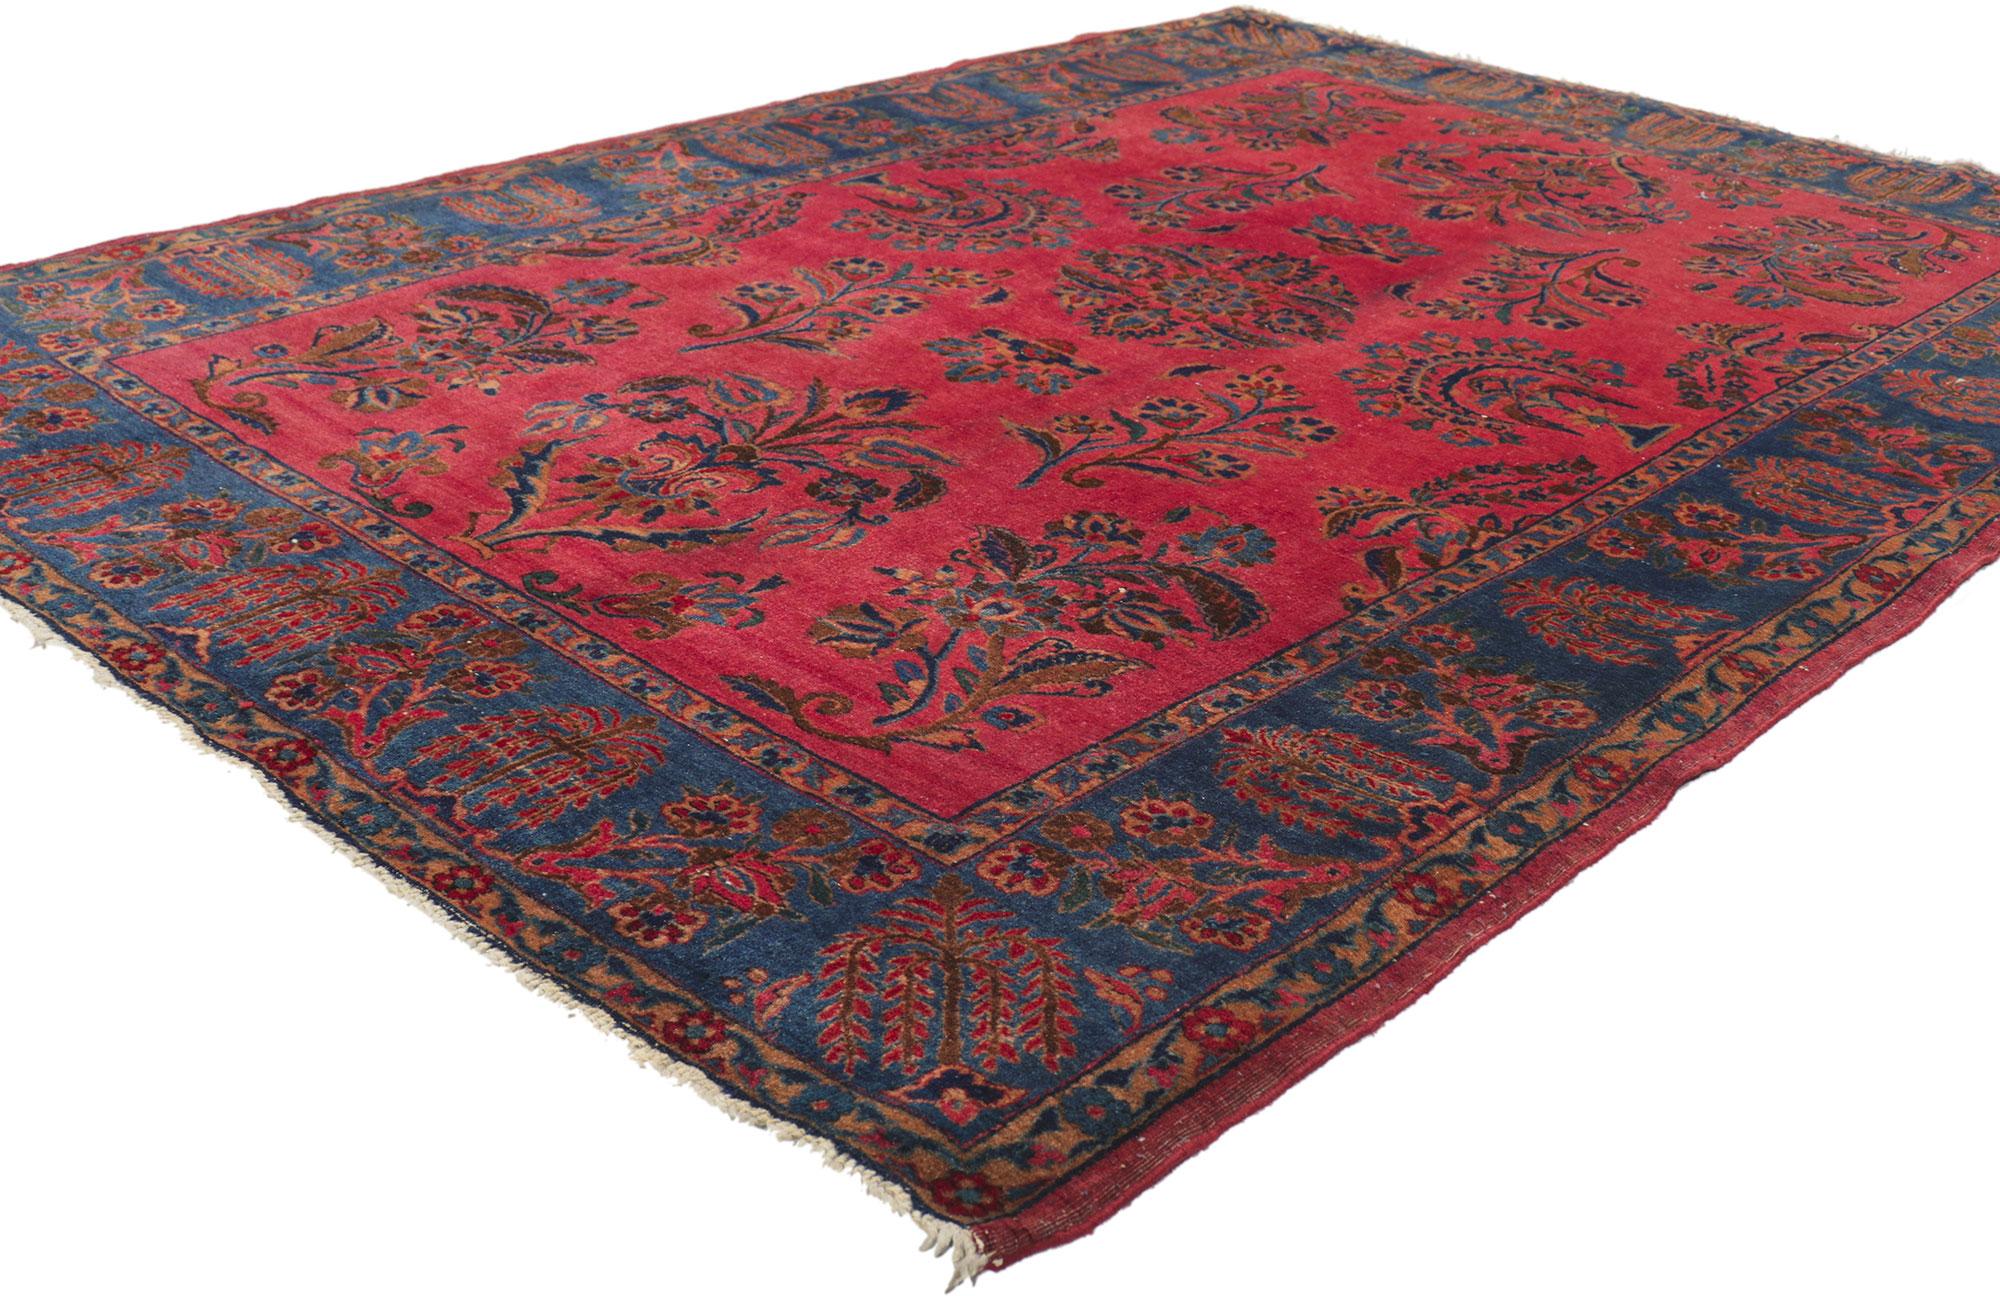 ?78451 Antique Persian Mohajeran Sarouk rug, 04'06 x 06'03. With its timeless design, incredible detail and texture, this hand-knotted wool antique Persian Mohajeran rug is poised to impress. The eye-catching stylized floral pattern and saturated